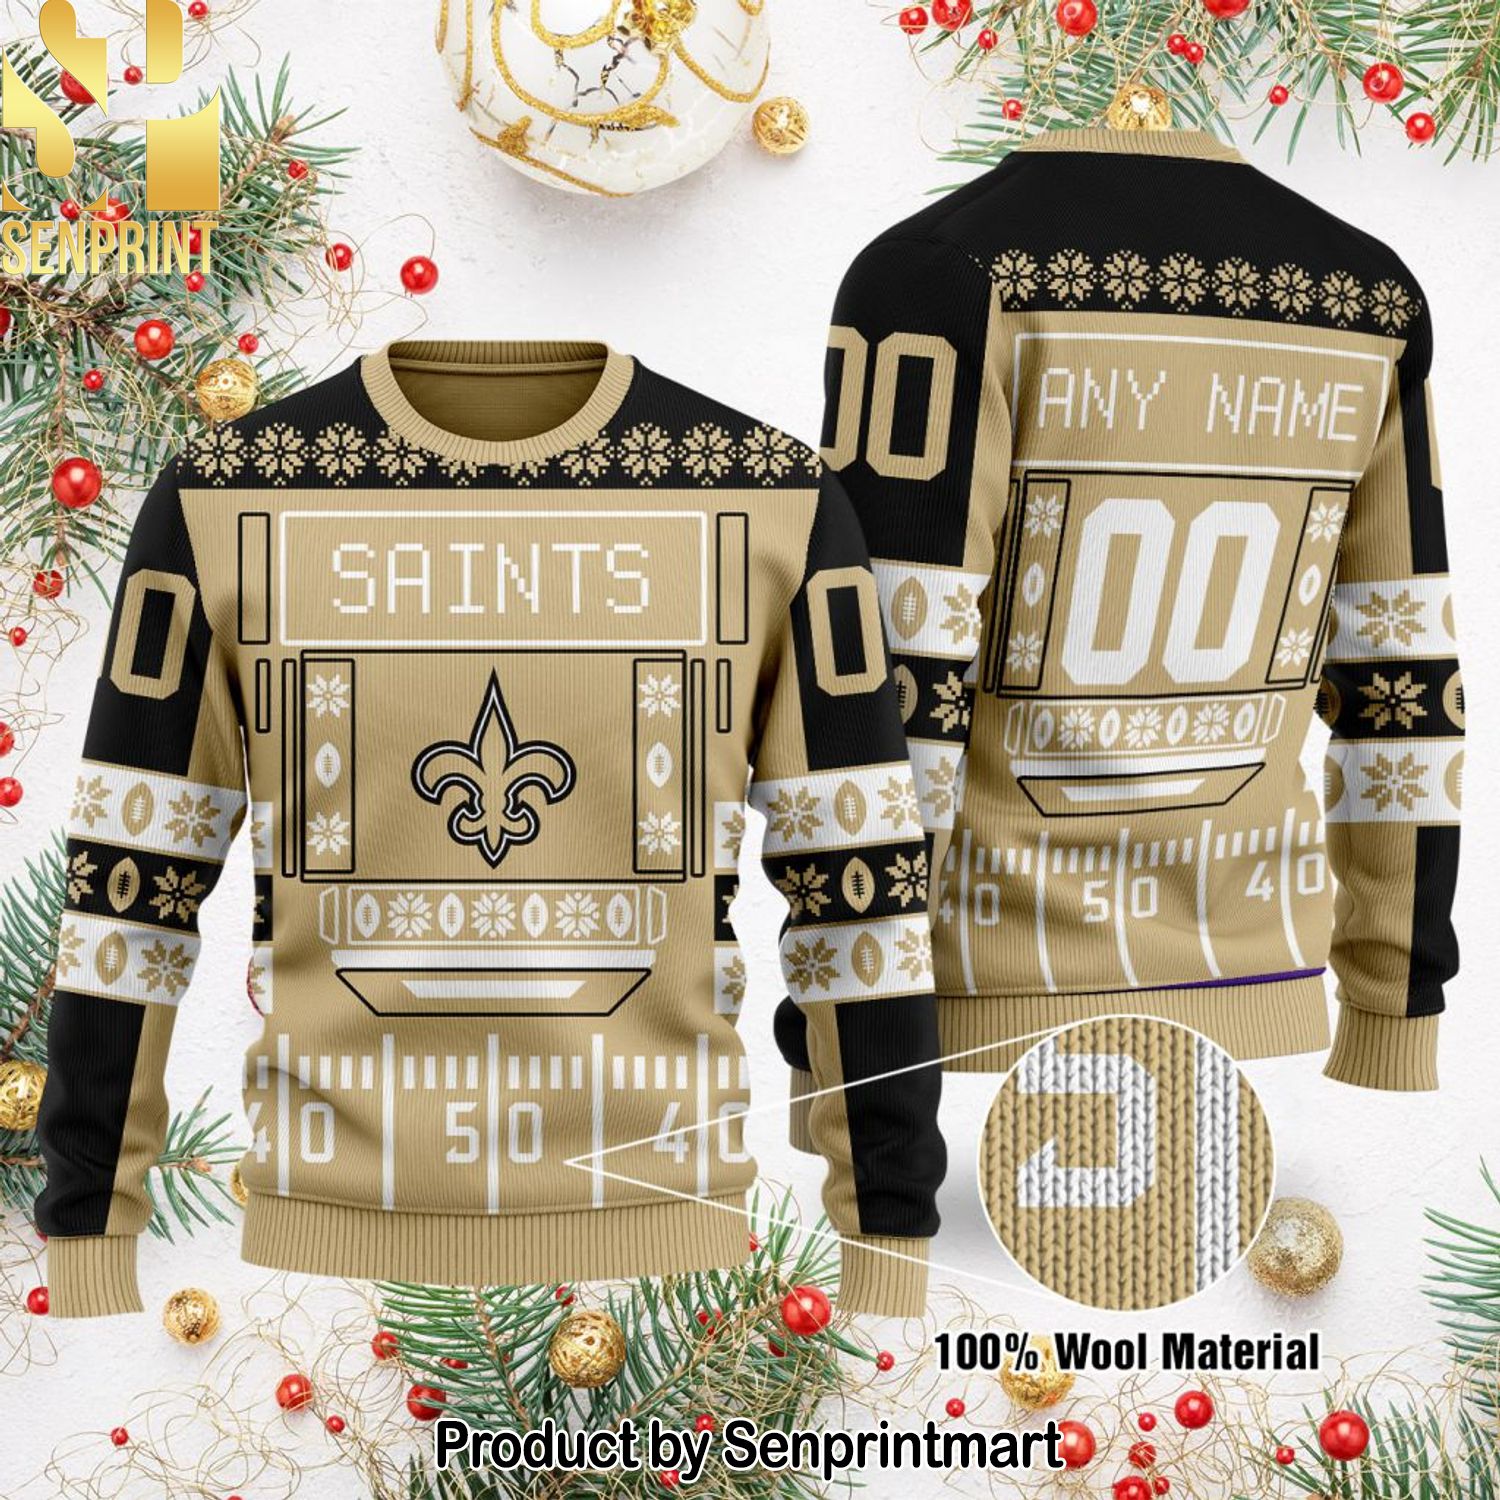 New Orleans Saints NFL For Christmas Gifts Knitting Pattern Sweater